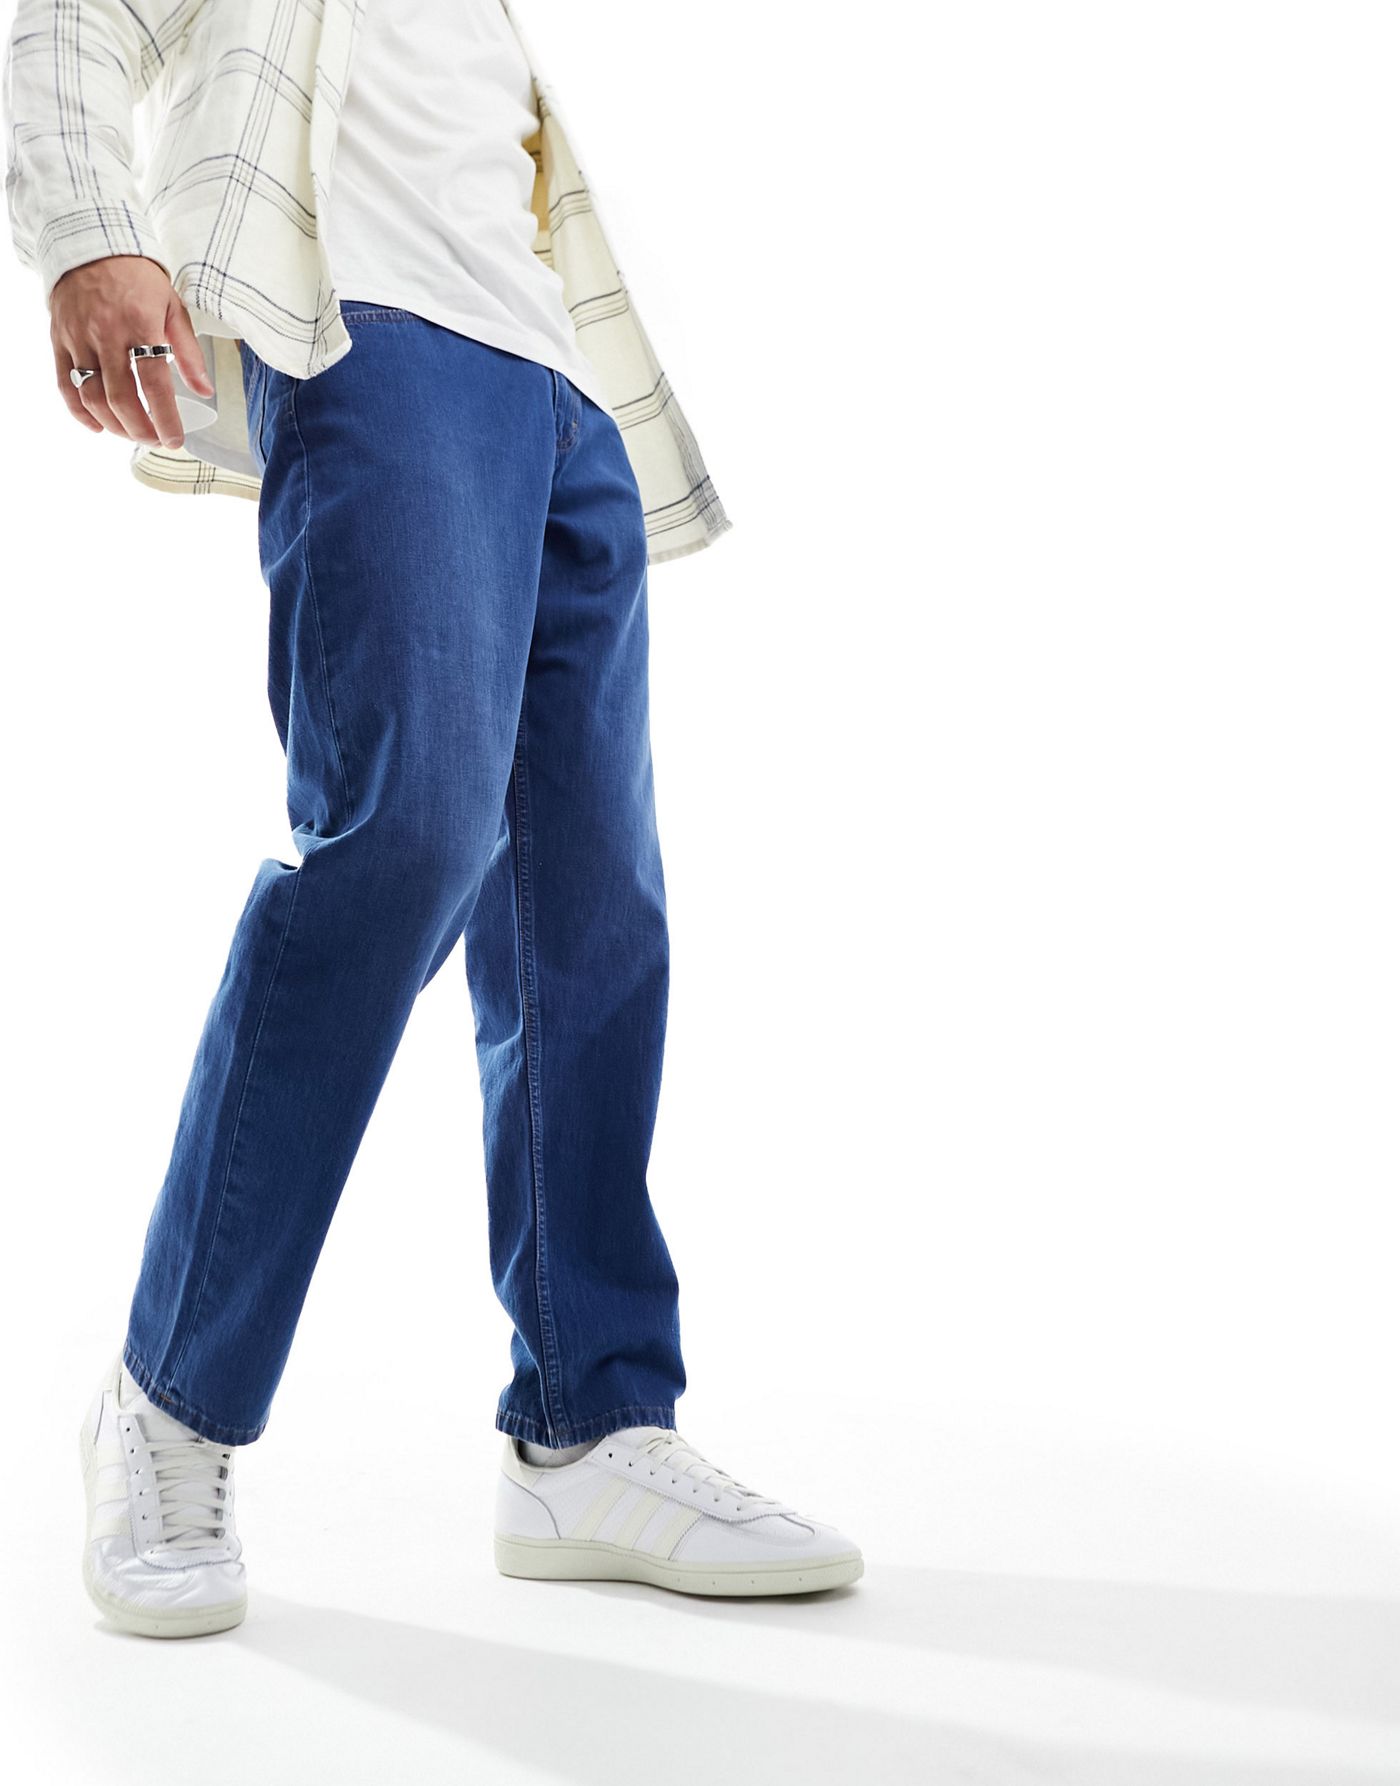 Lee Oscar tapered fit jeans in 90s mid wash